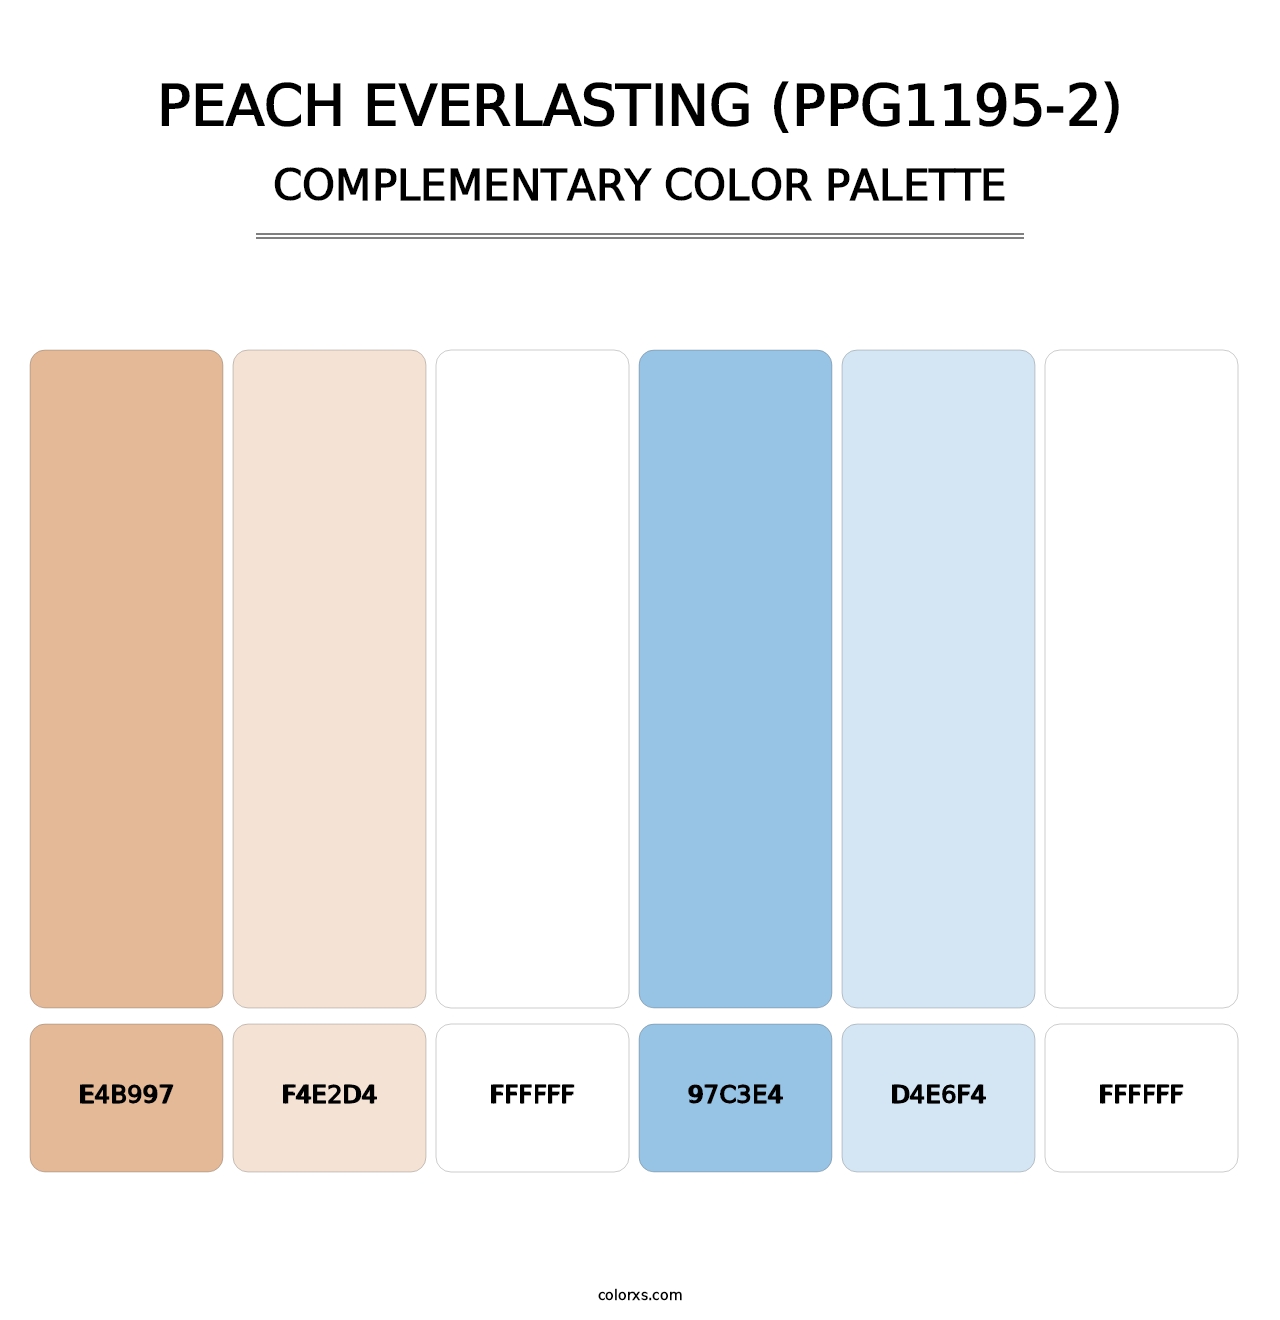 Peach Everlasting (PPG1195-2) - Complementary Color Palette